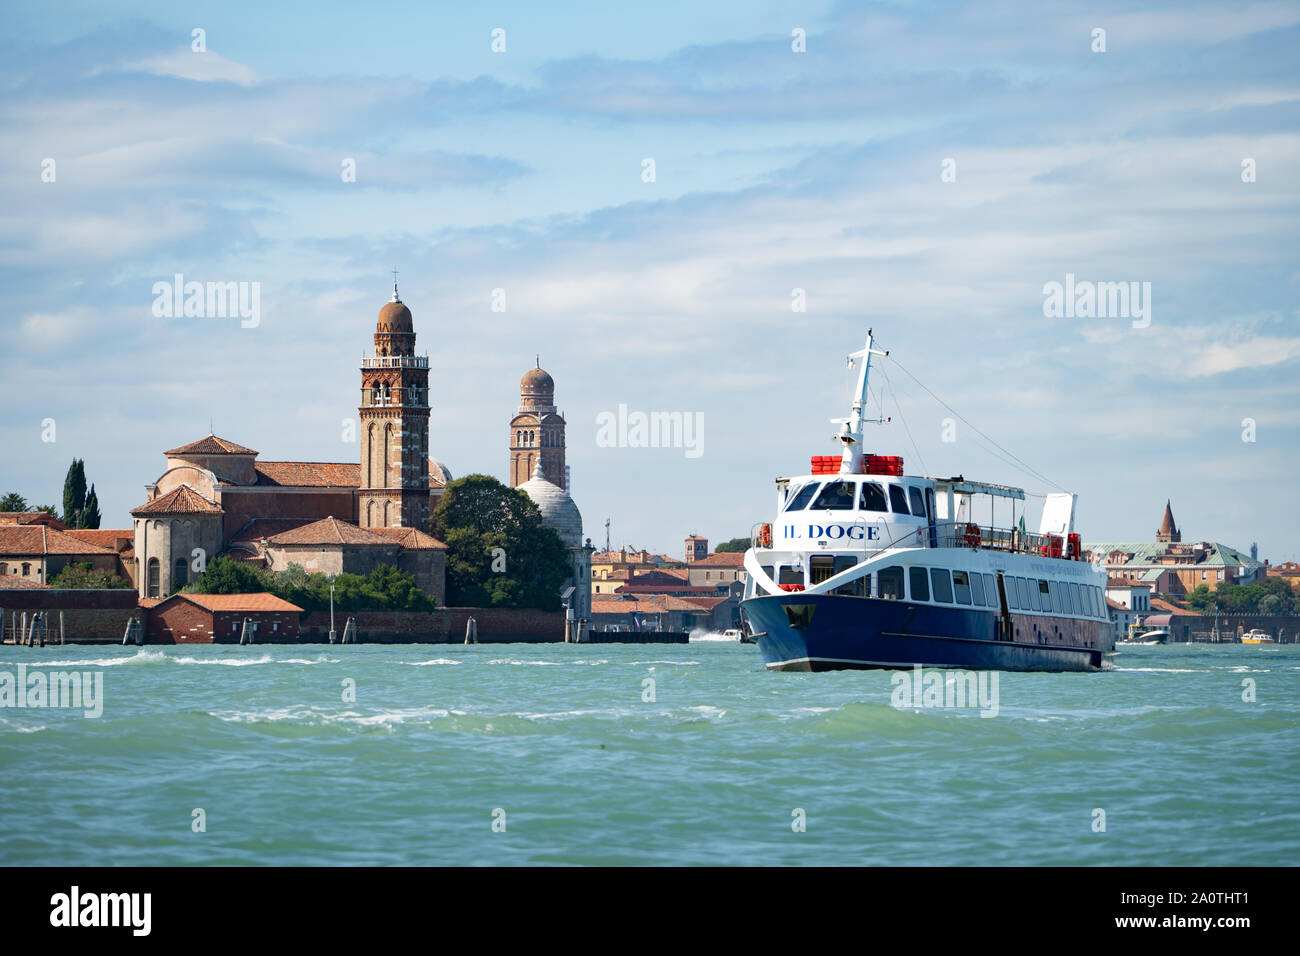 Passenger day trip boat ('Il Doge') travelling between Venice and the islands, Venice, Italy Stock Photo